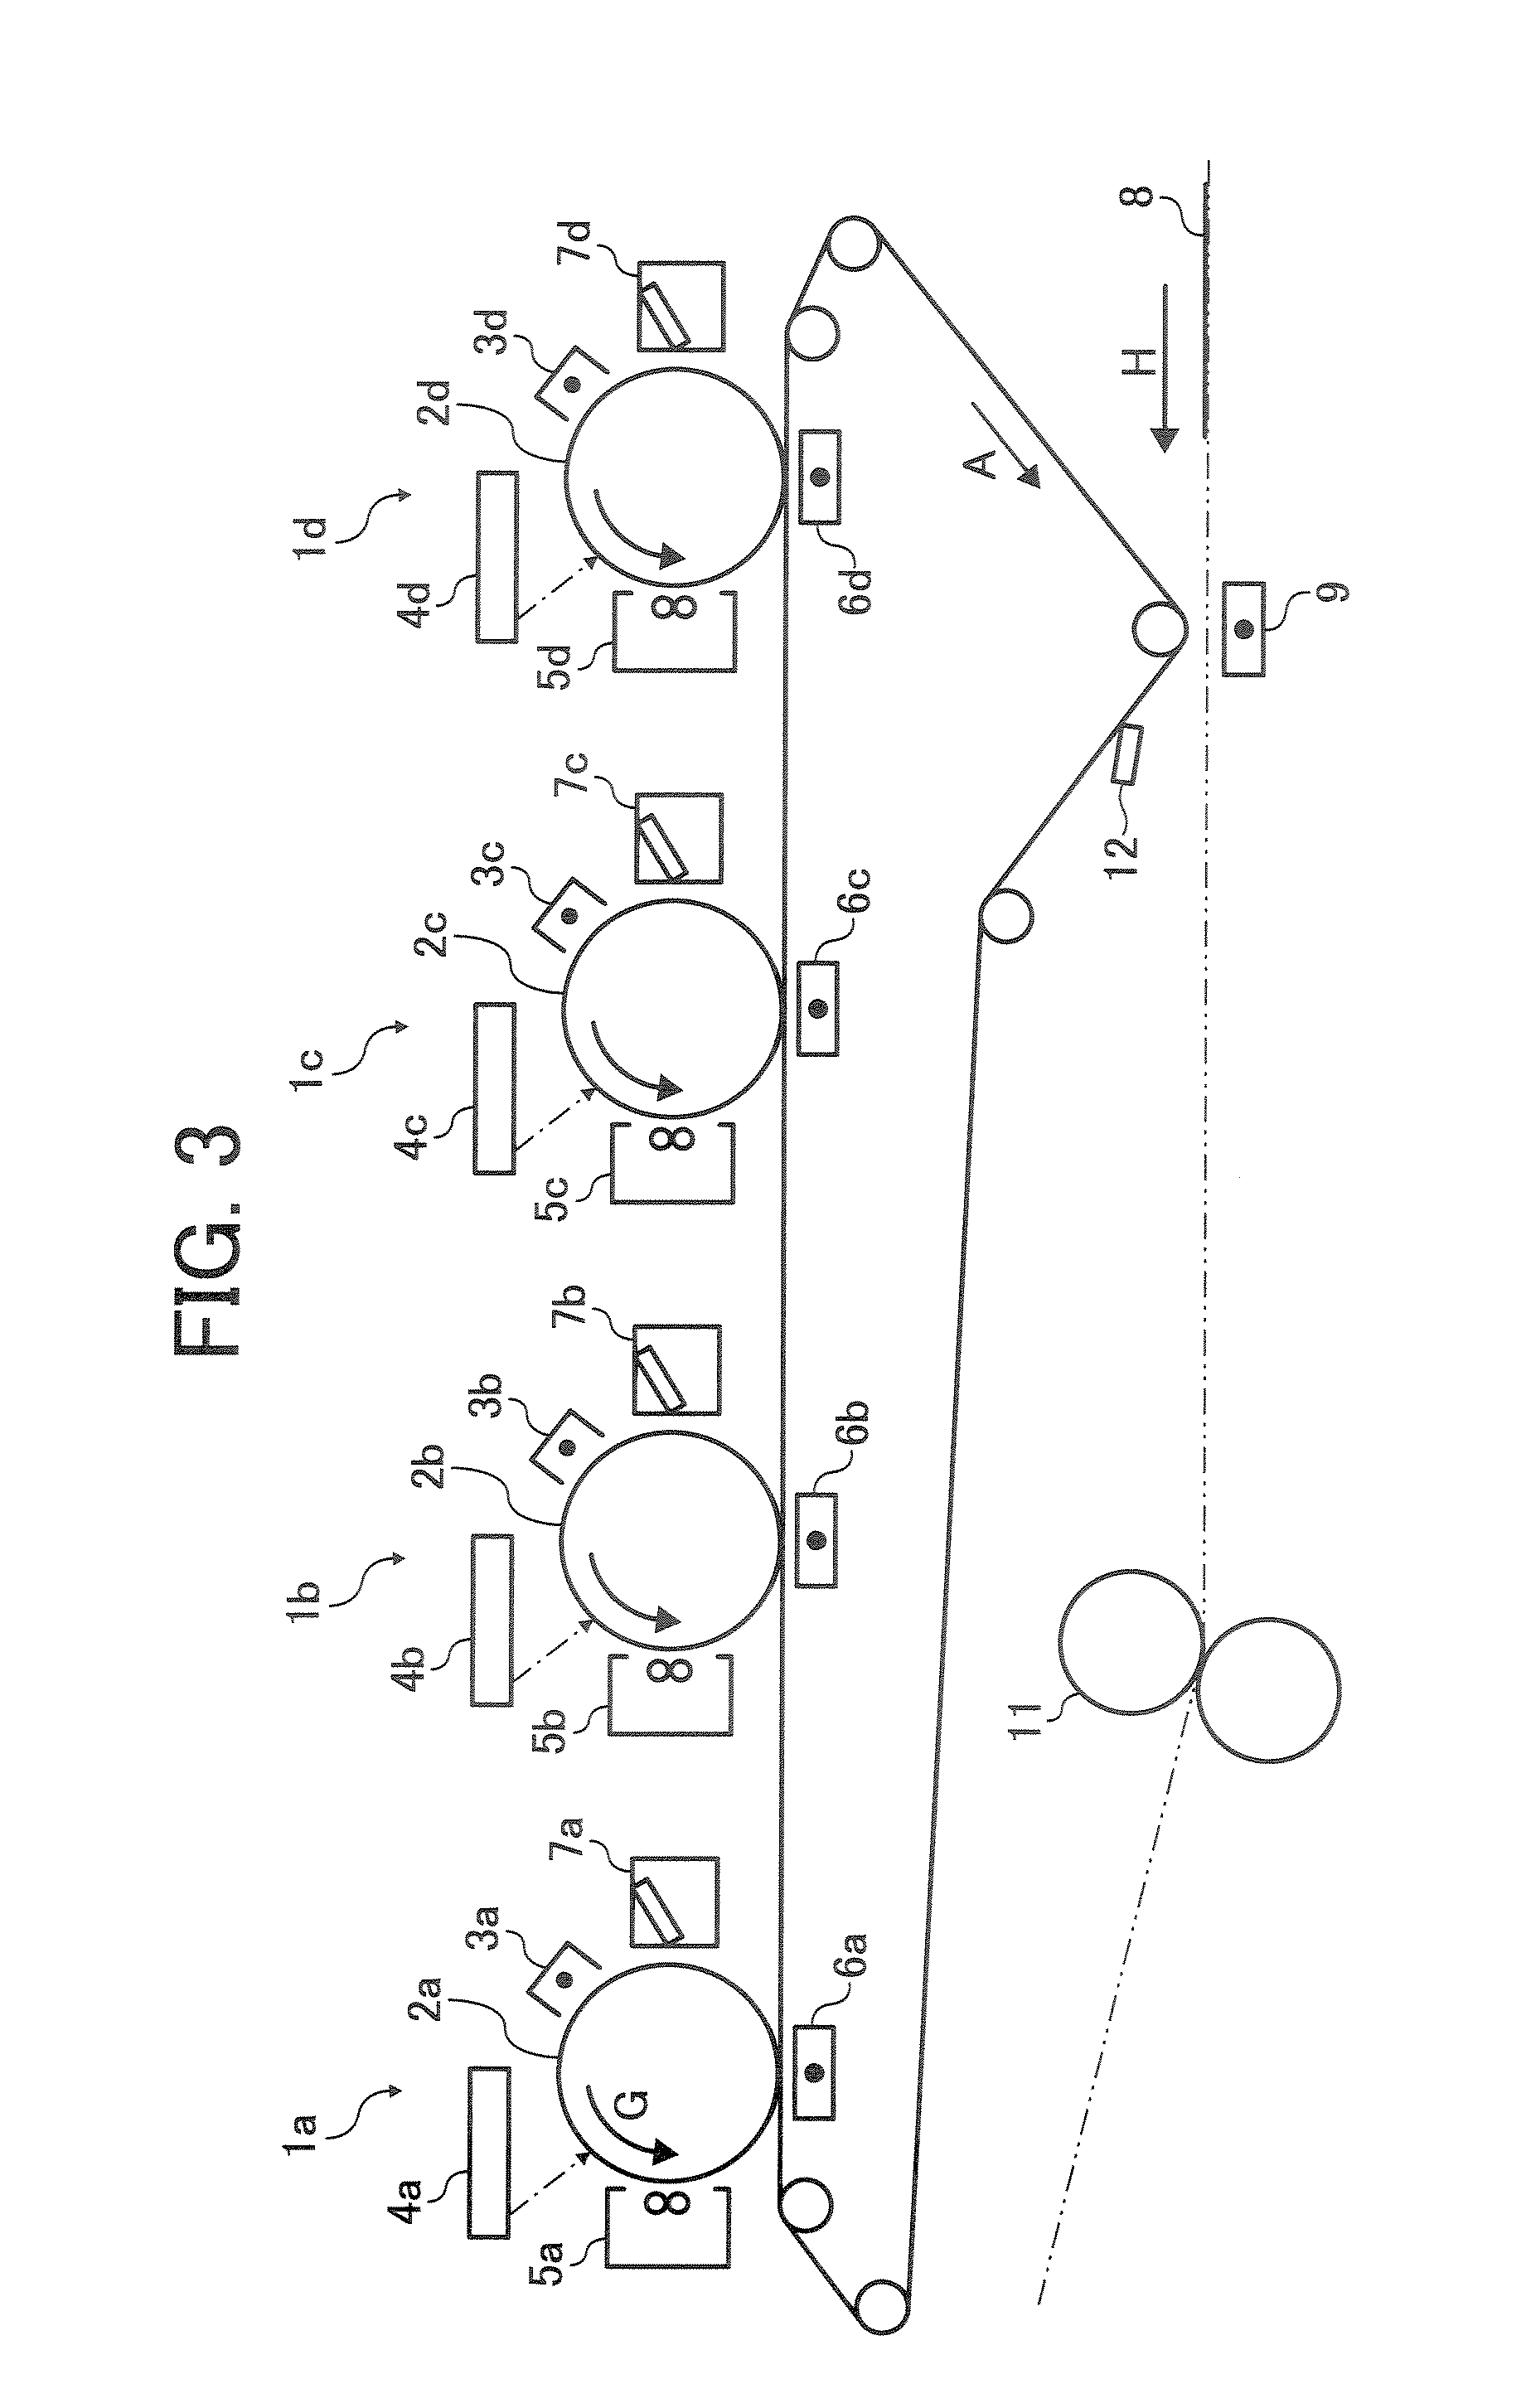 Image forming apparatus including belt traveling unit which detects drifiting of belt postion